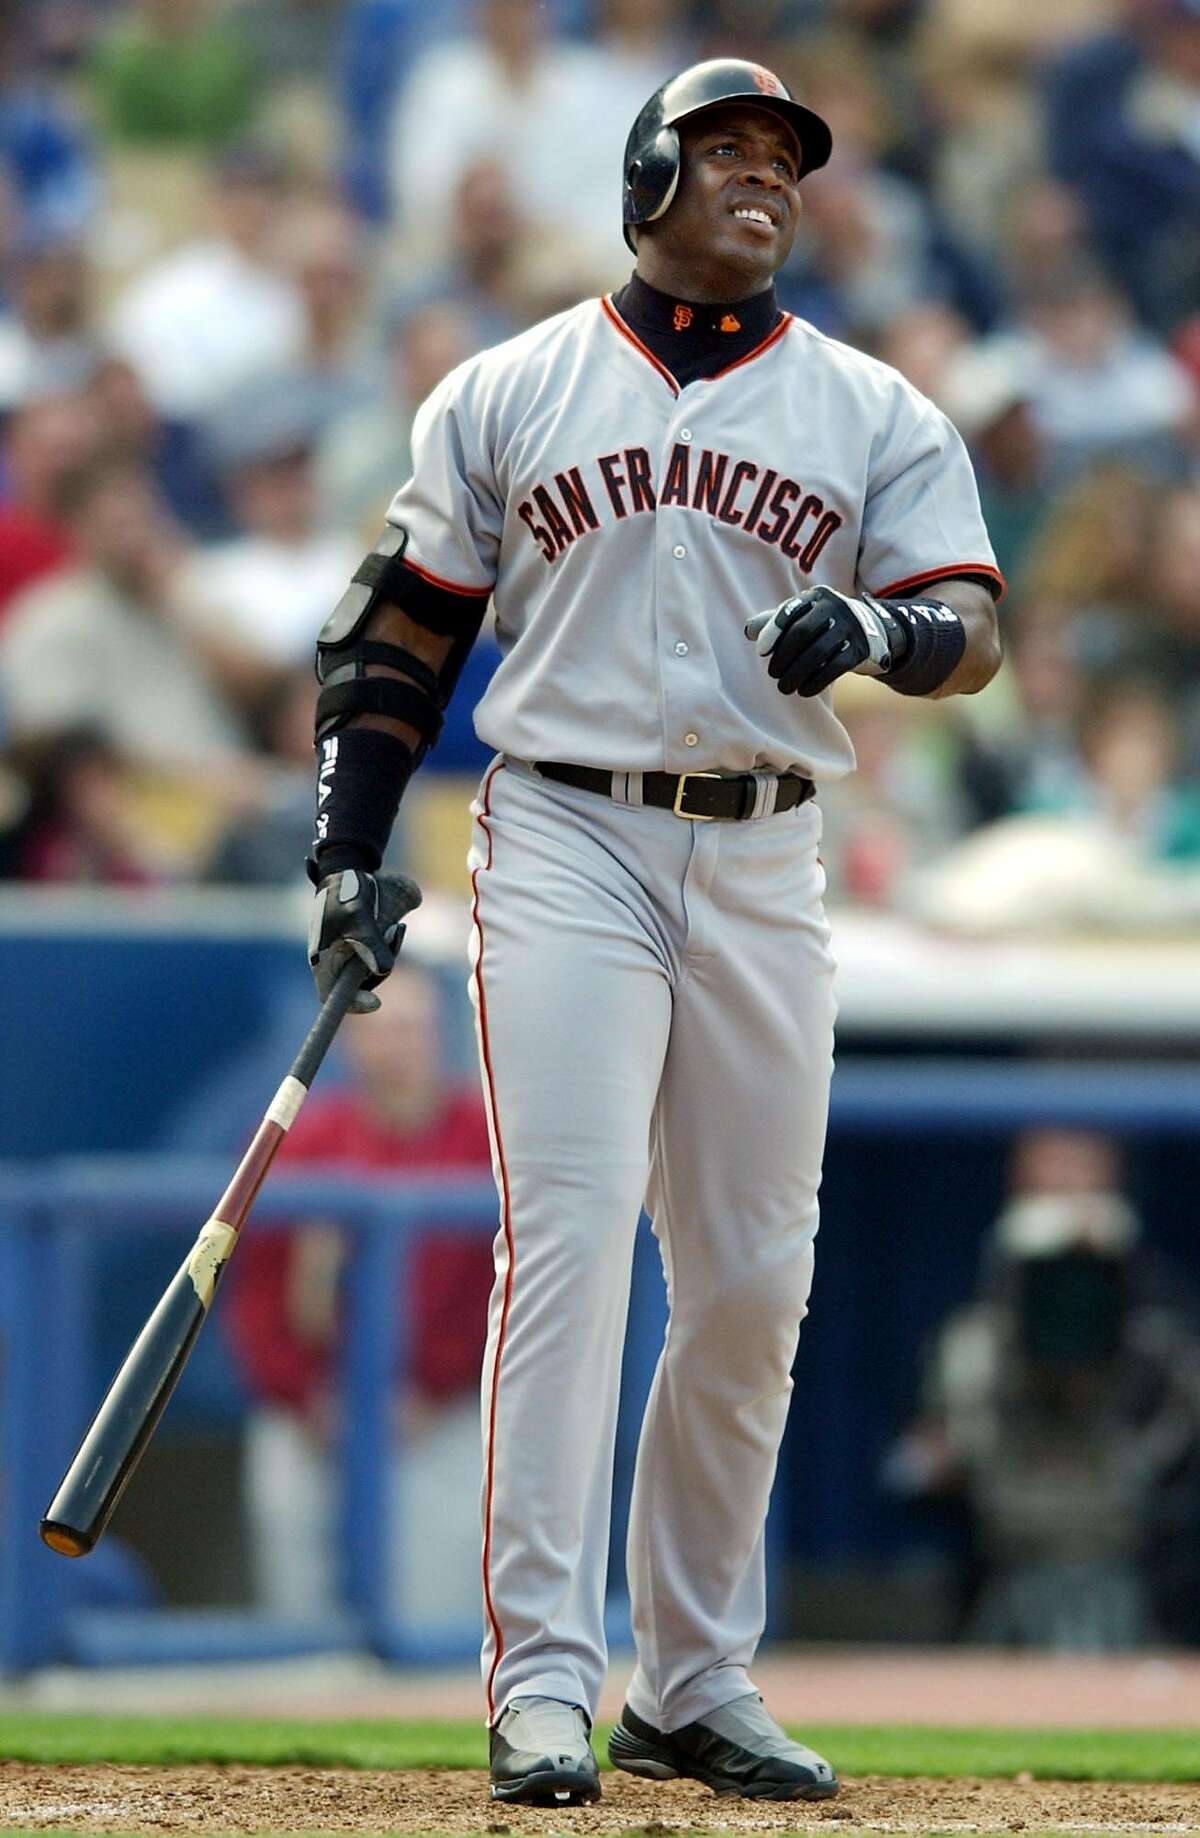 San Francisco Giants slugger Barry Bonds looks at his solo home run shot to right field off of Los Angeles Dodgers pitcher Omar Daal for his second home run of the game during the seventh inning of their season opener at Dodger Stadium Tuesday, April 2, 2002, in Los Angeles. (AP Photo/Kevork Djansezian)